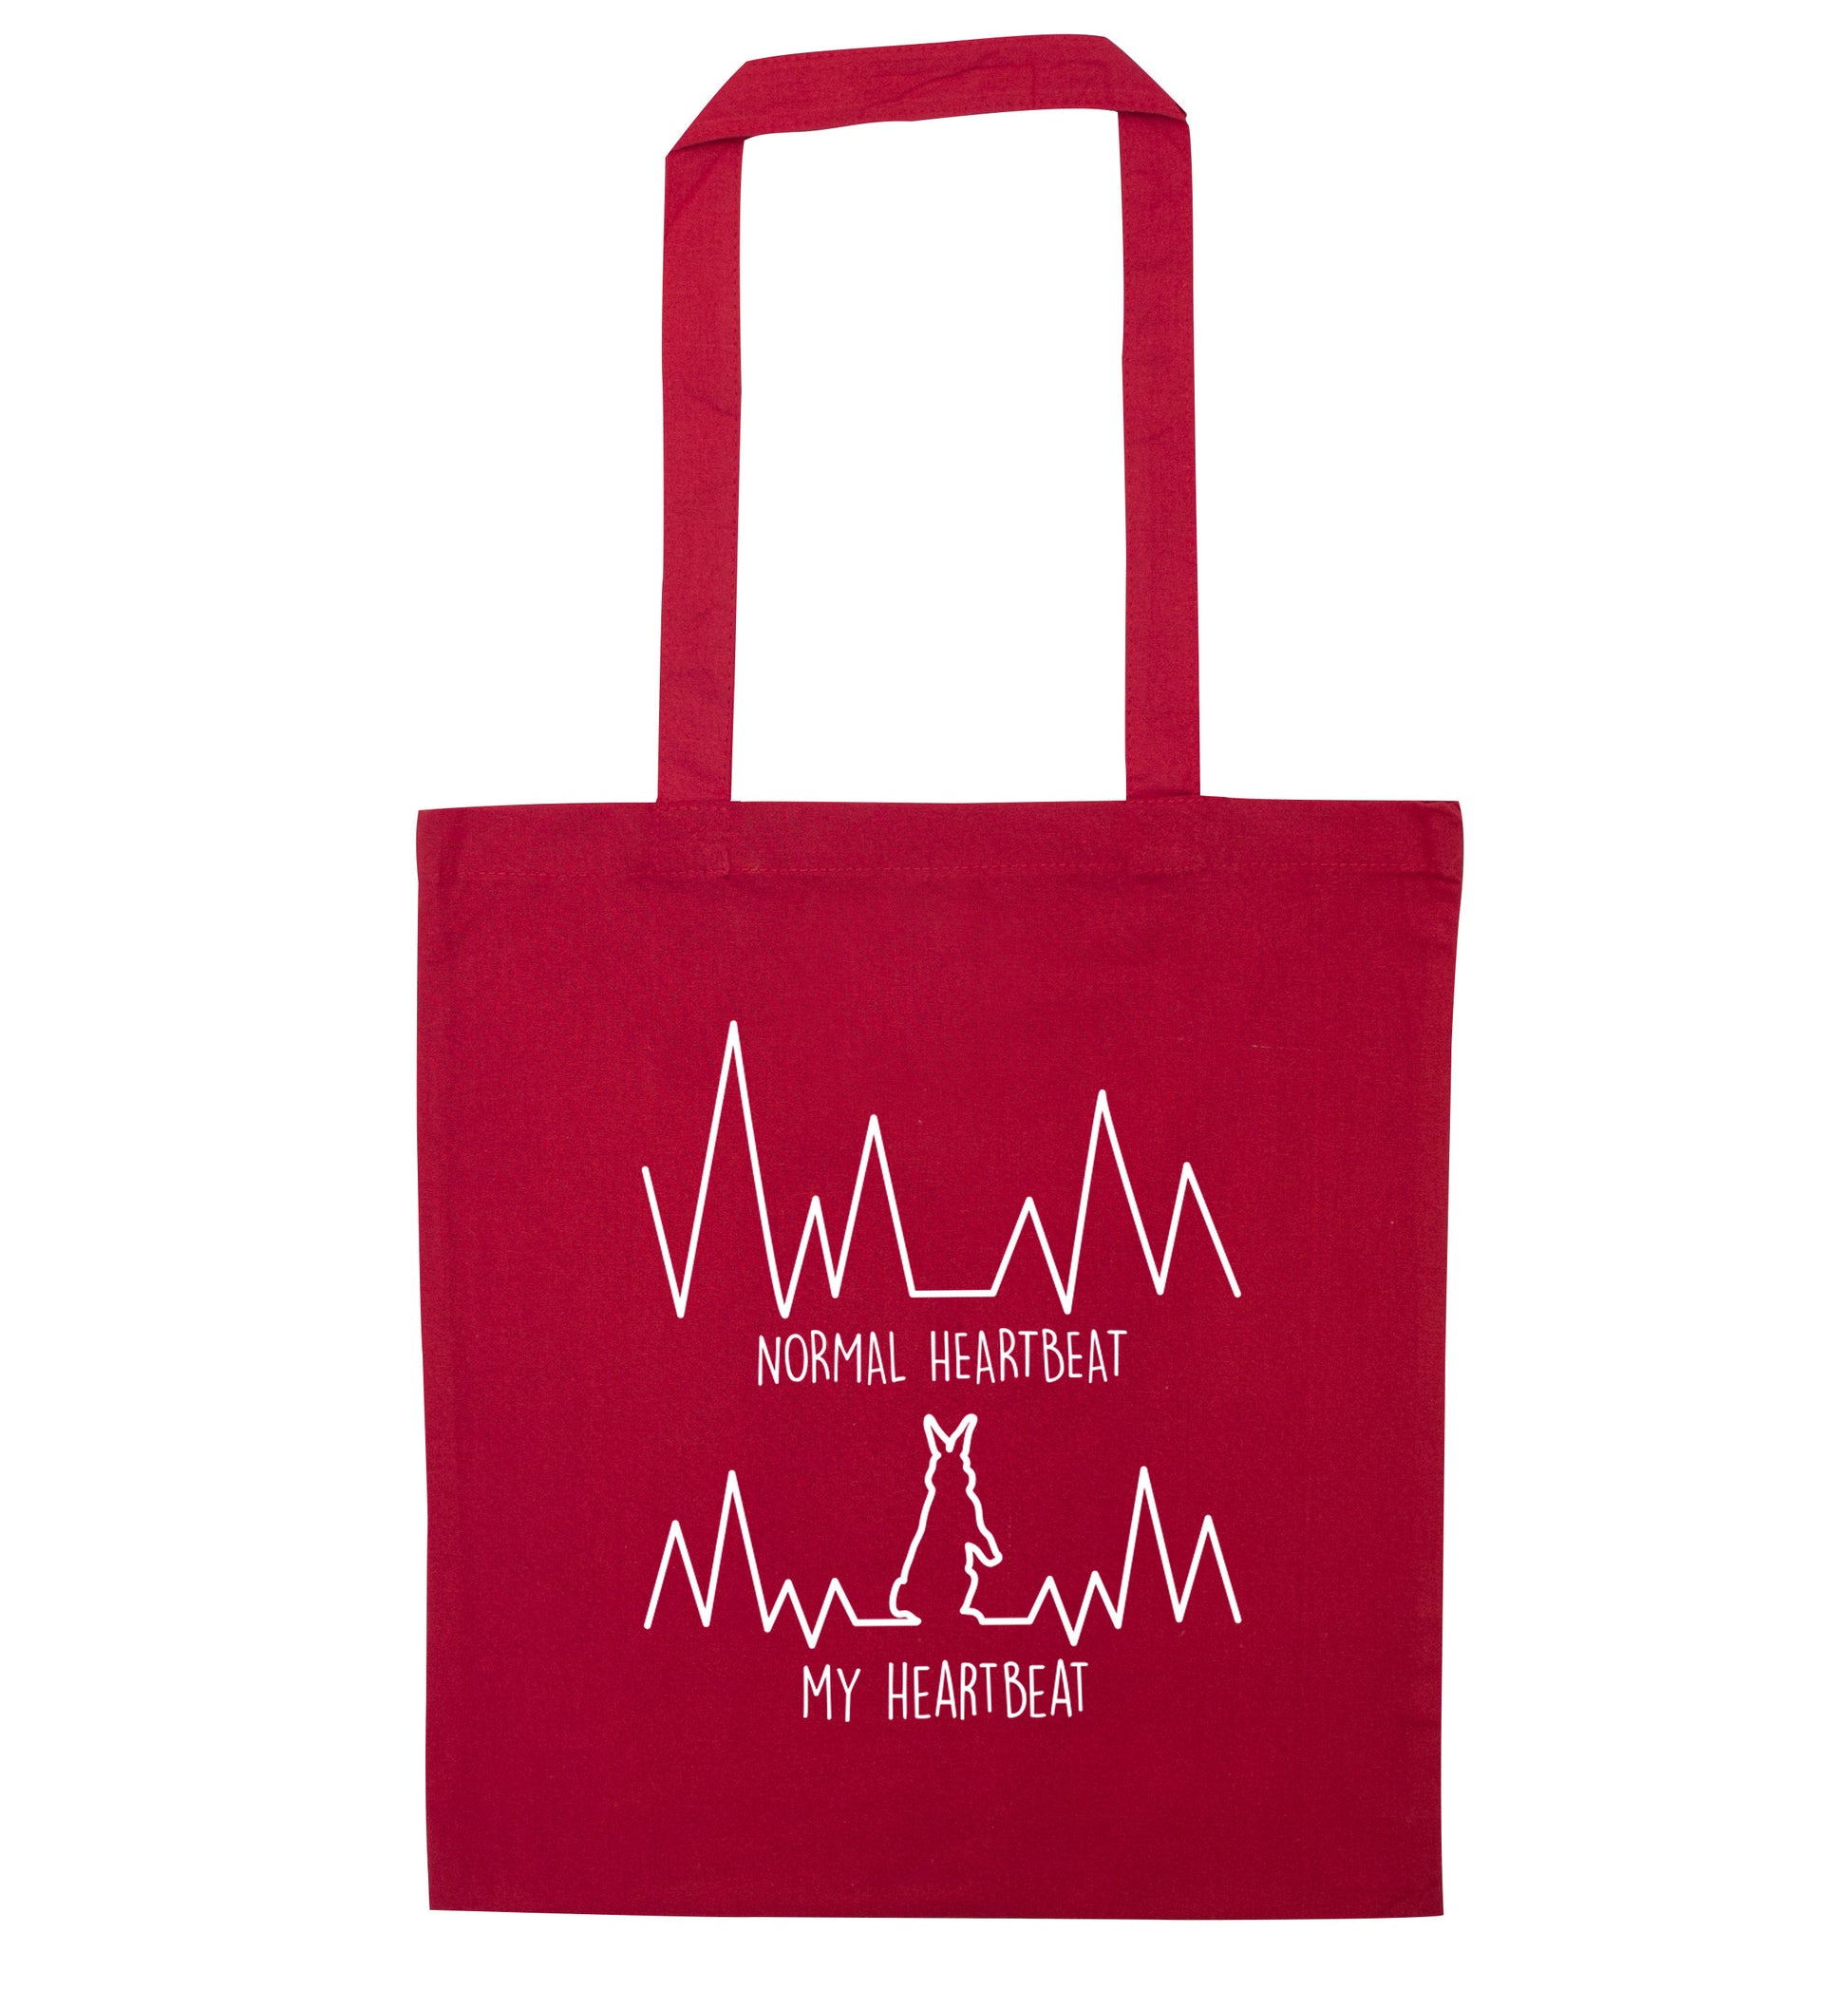 Normal heartbeat, my heartbeat rabbit lover red tote bag